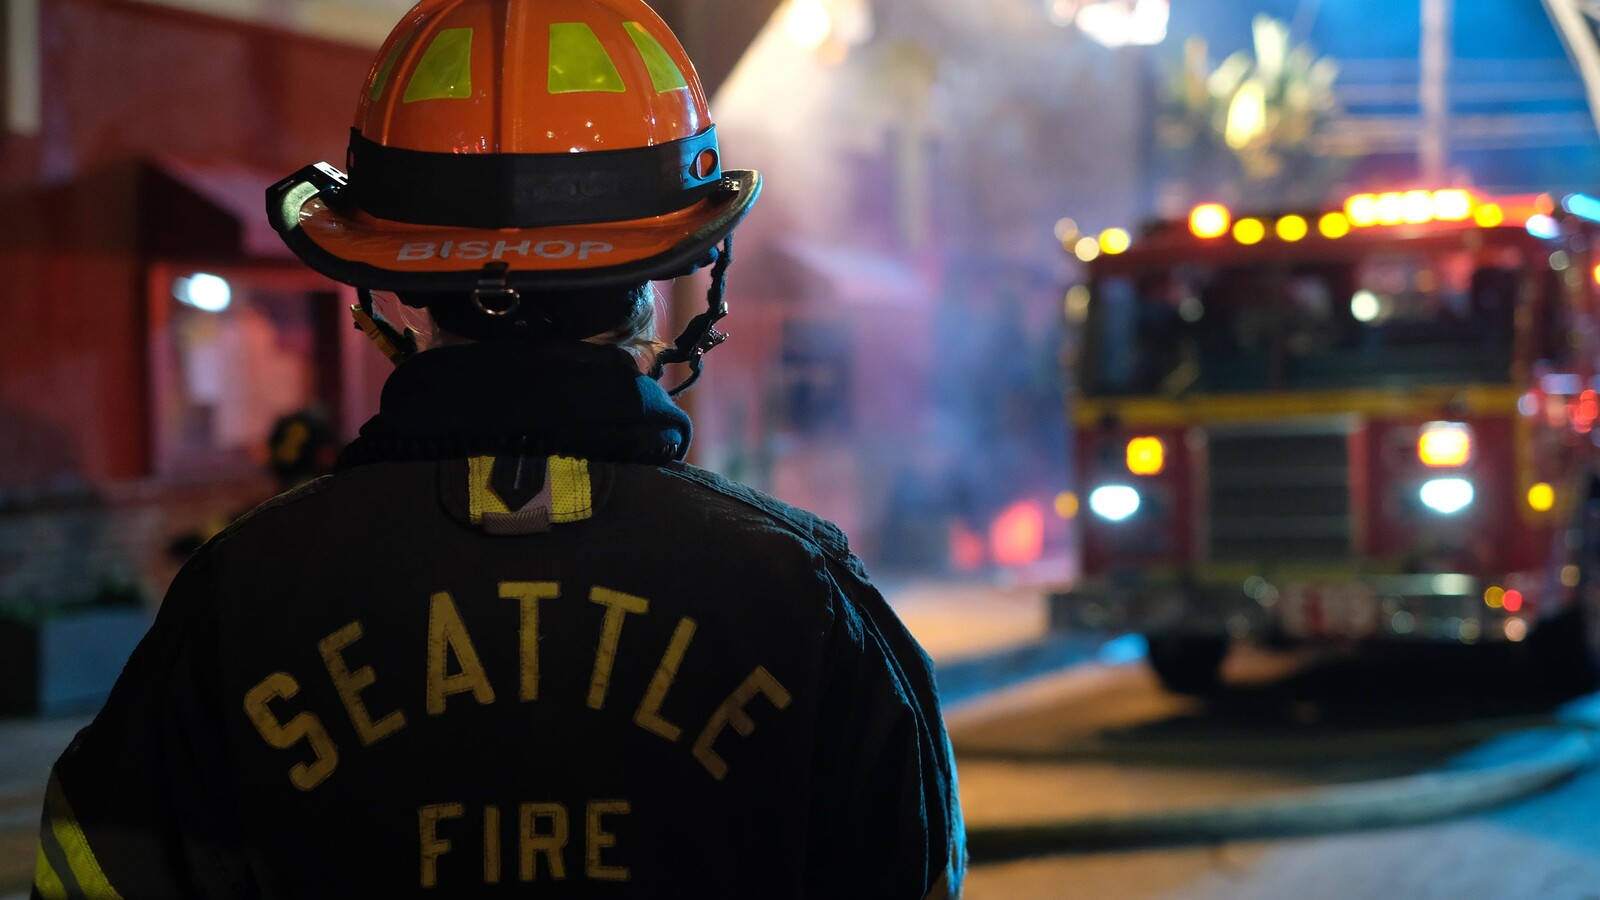 Caption: The Vibrant Seattle Fire Department Station 19 Wallpaper